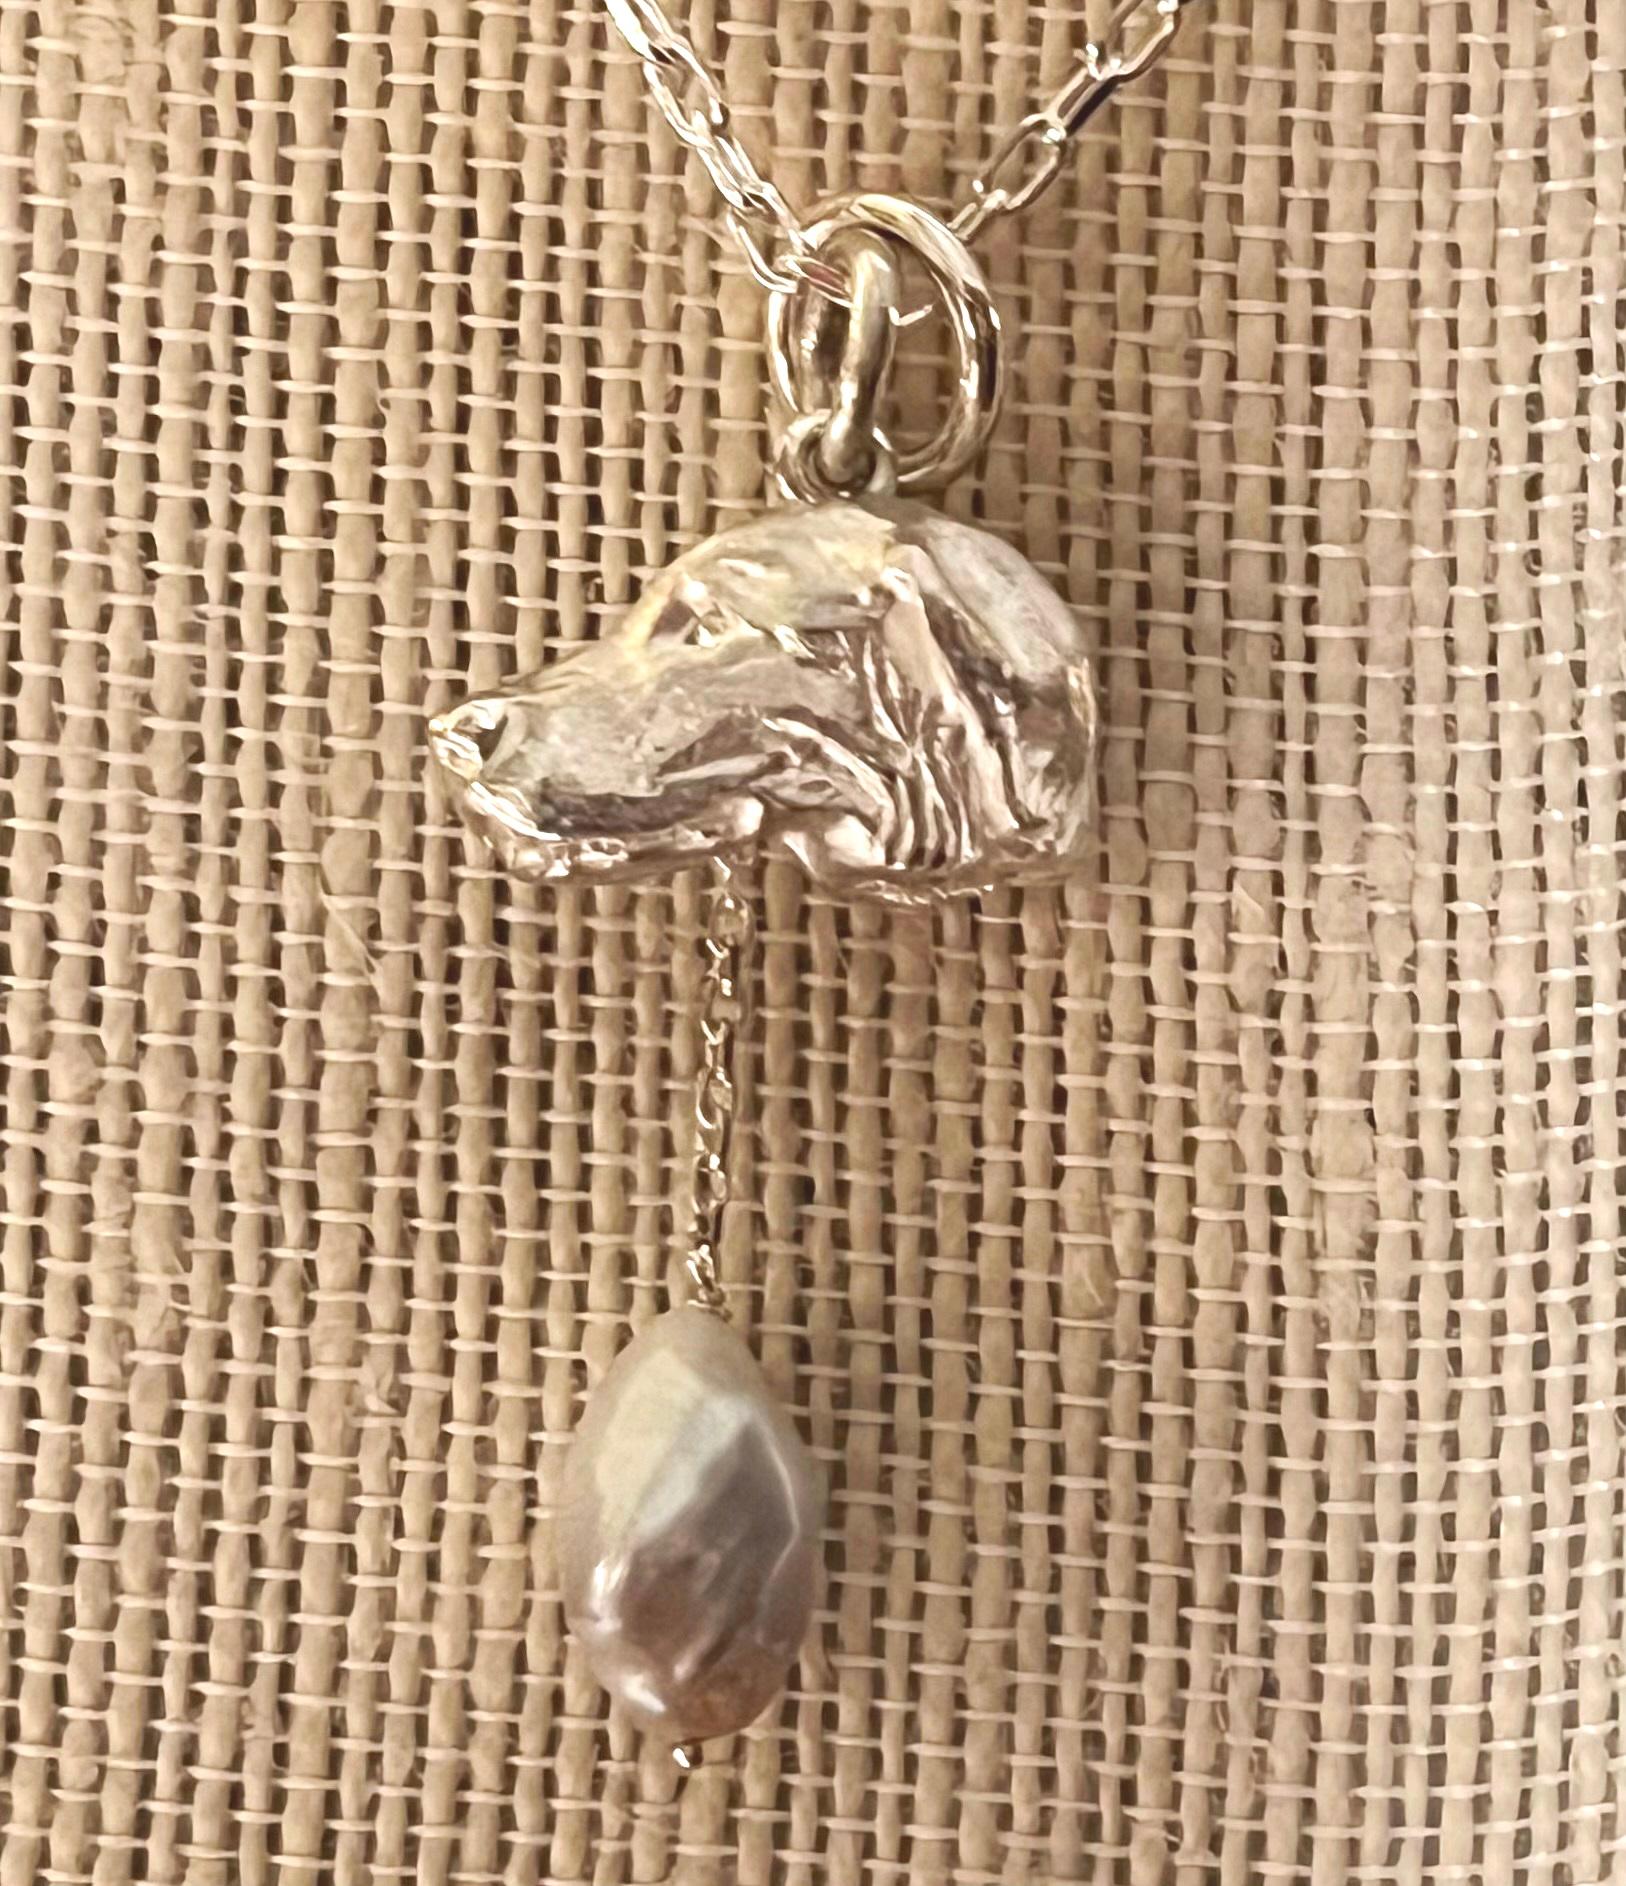 Miniature wildlife artist, Paul Eaton from England, hand sculpted a Retriever dog head pendant which is elegantly framed with one or two drop freshwater pearls. The bespoke Retriever dog sculpture is made into jewelry you can wear close to your